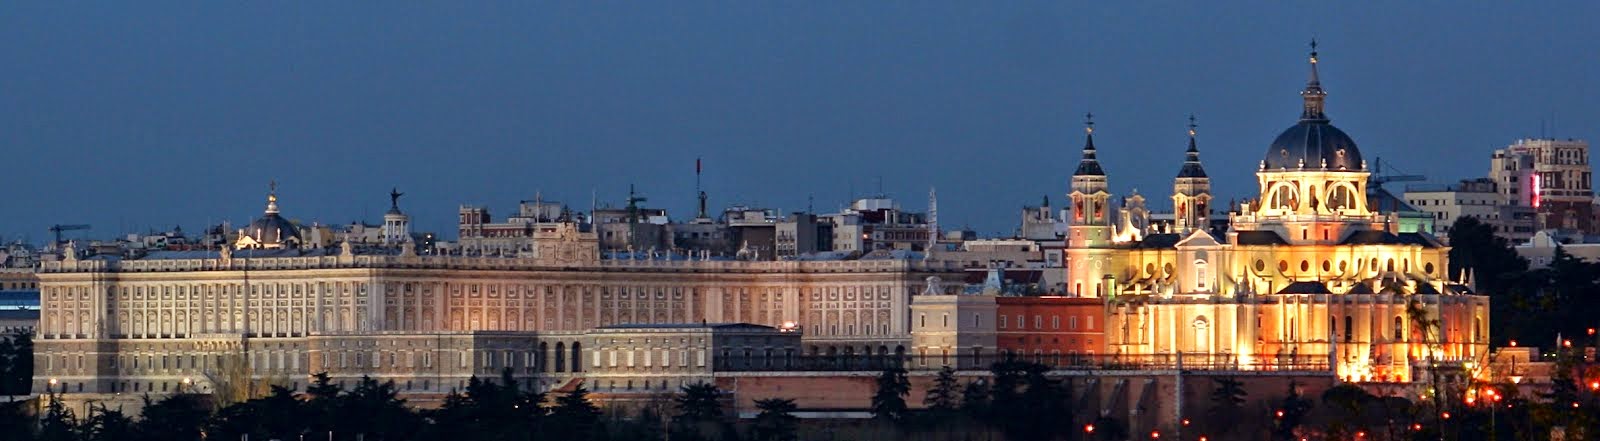 The Royal Palace and The Almudena Cathedral